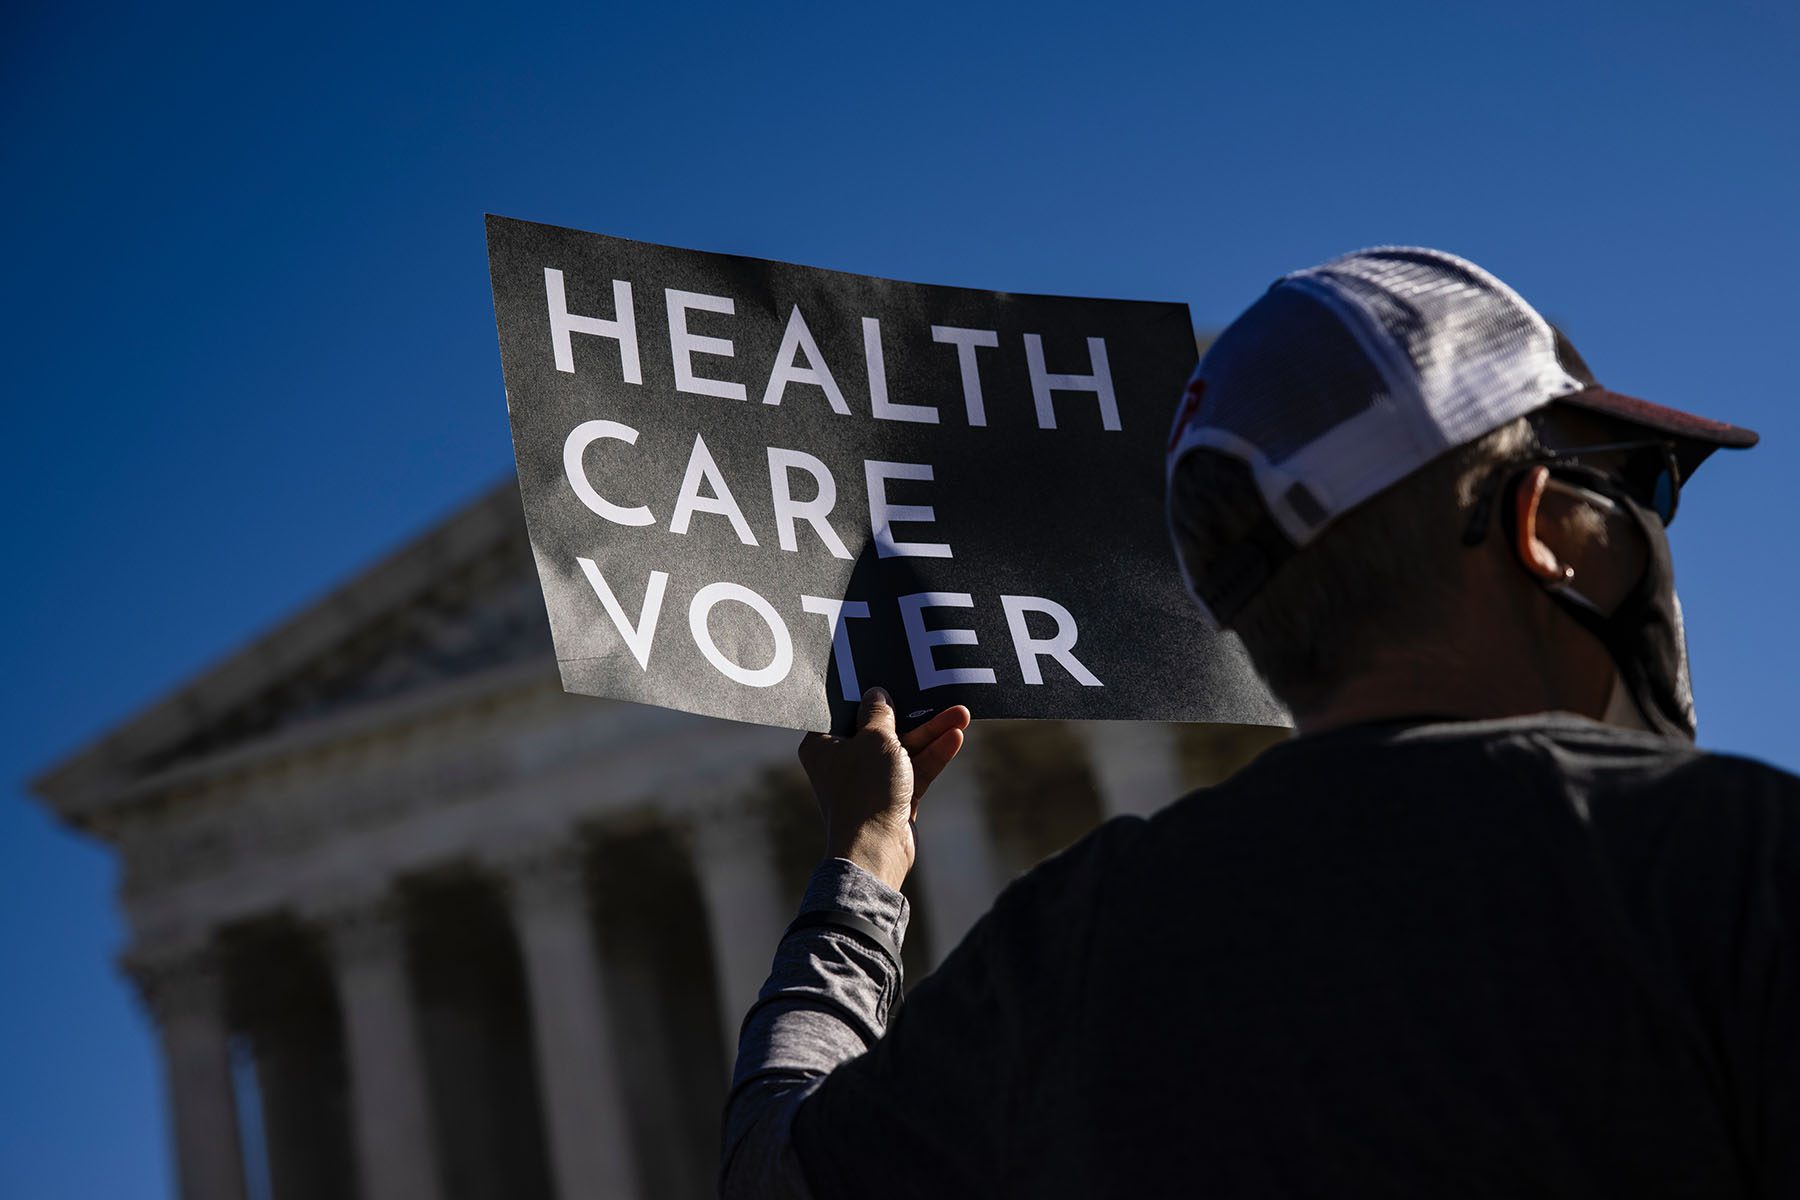 A supporter of the Affordable Care Act holds a sign that reads "Health Care Voter" as he protests in front of the Supreme Court.